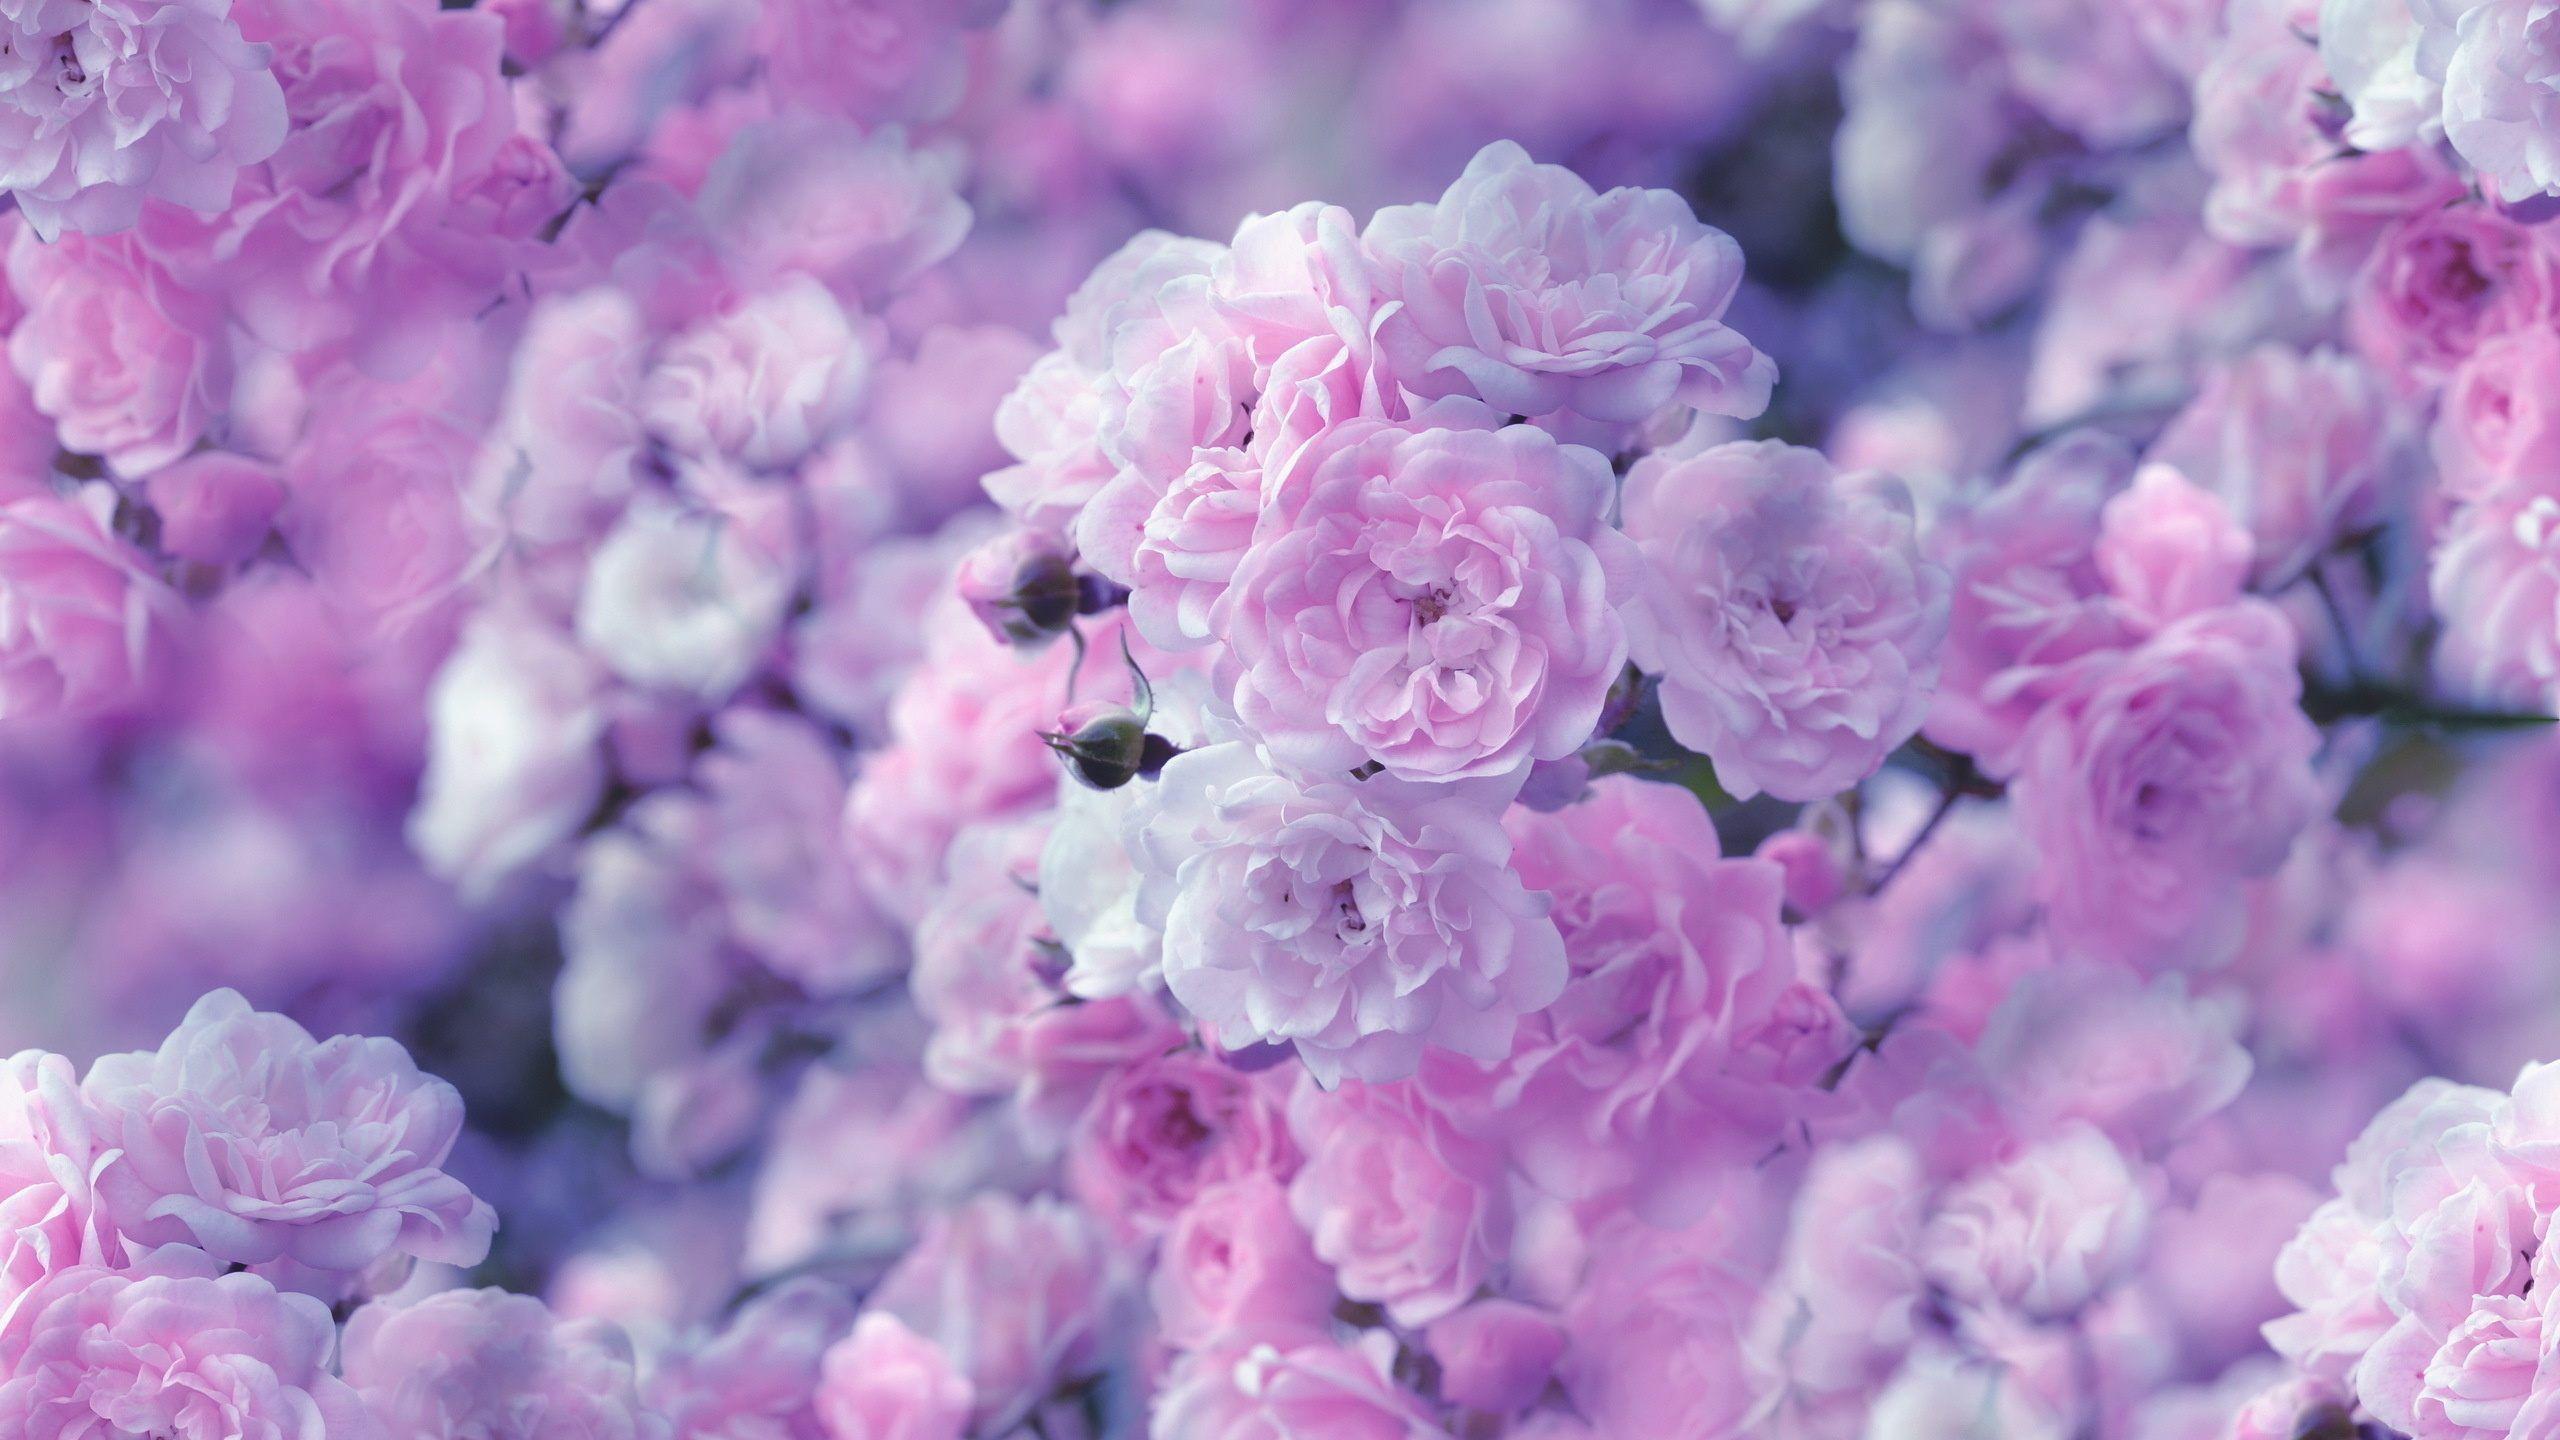 Pastel Flower Wallpapers - Top Free Pastel Flower Backgrounds - WallpaperAccess